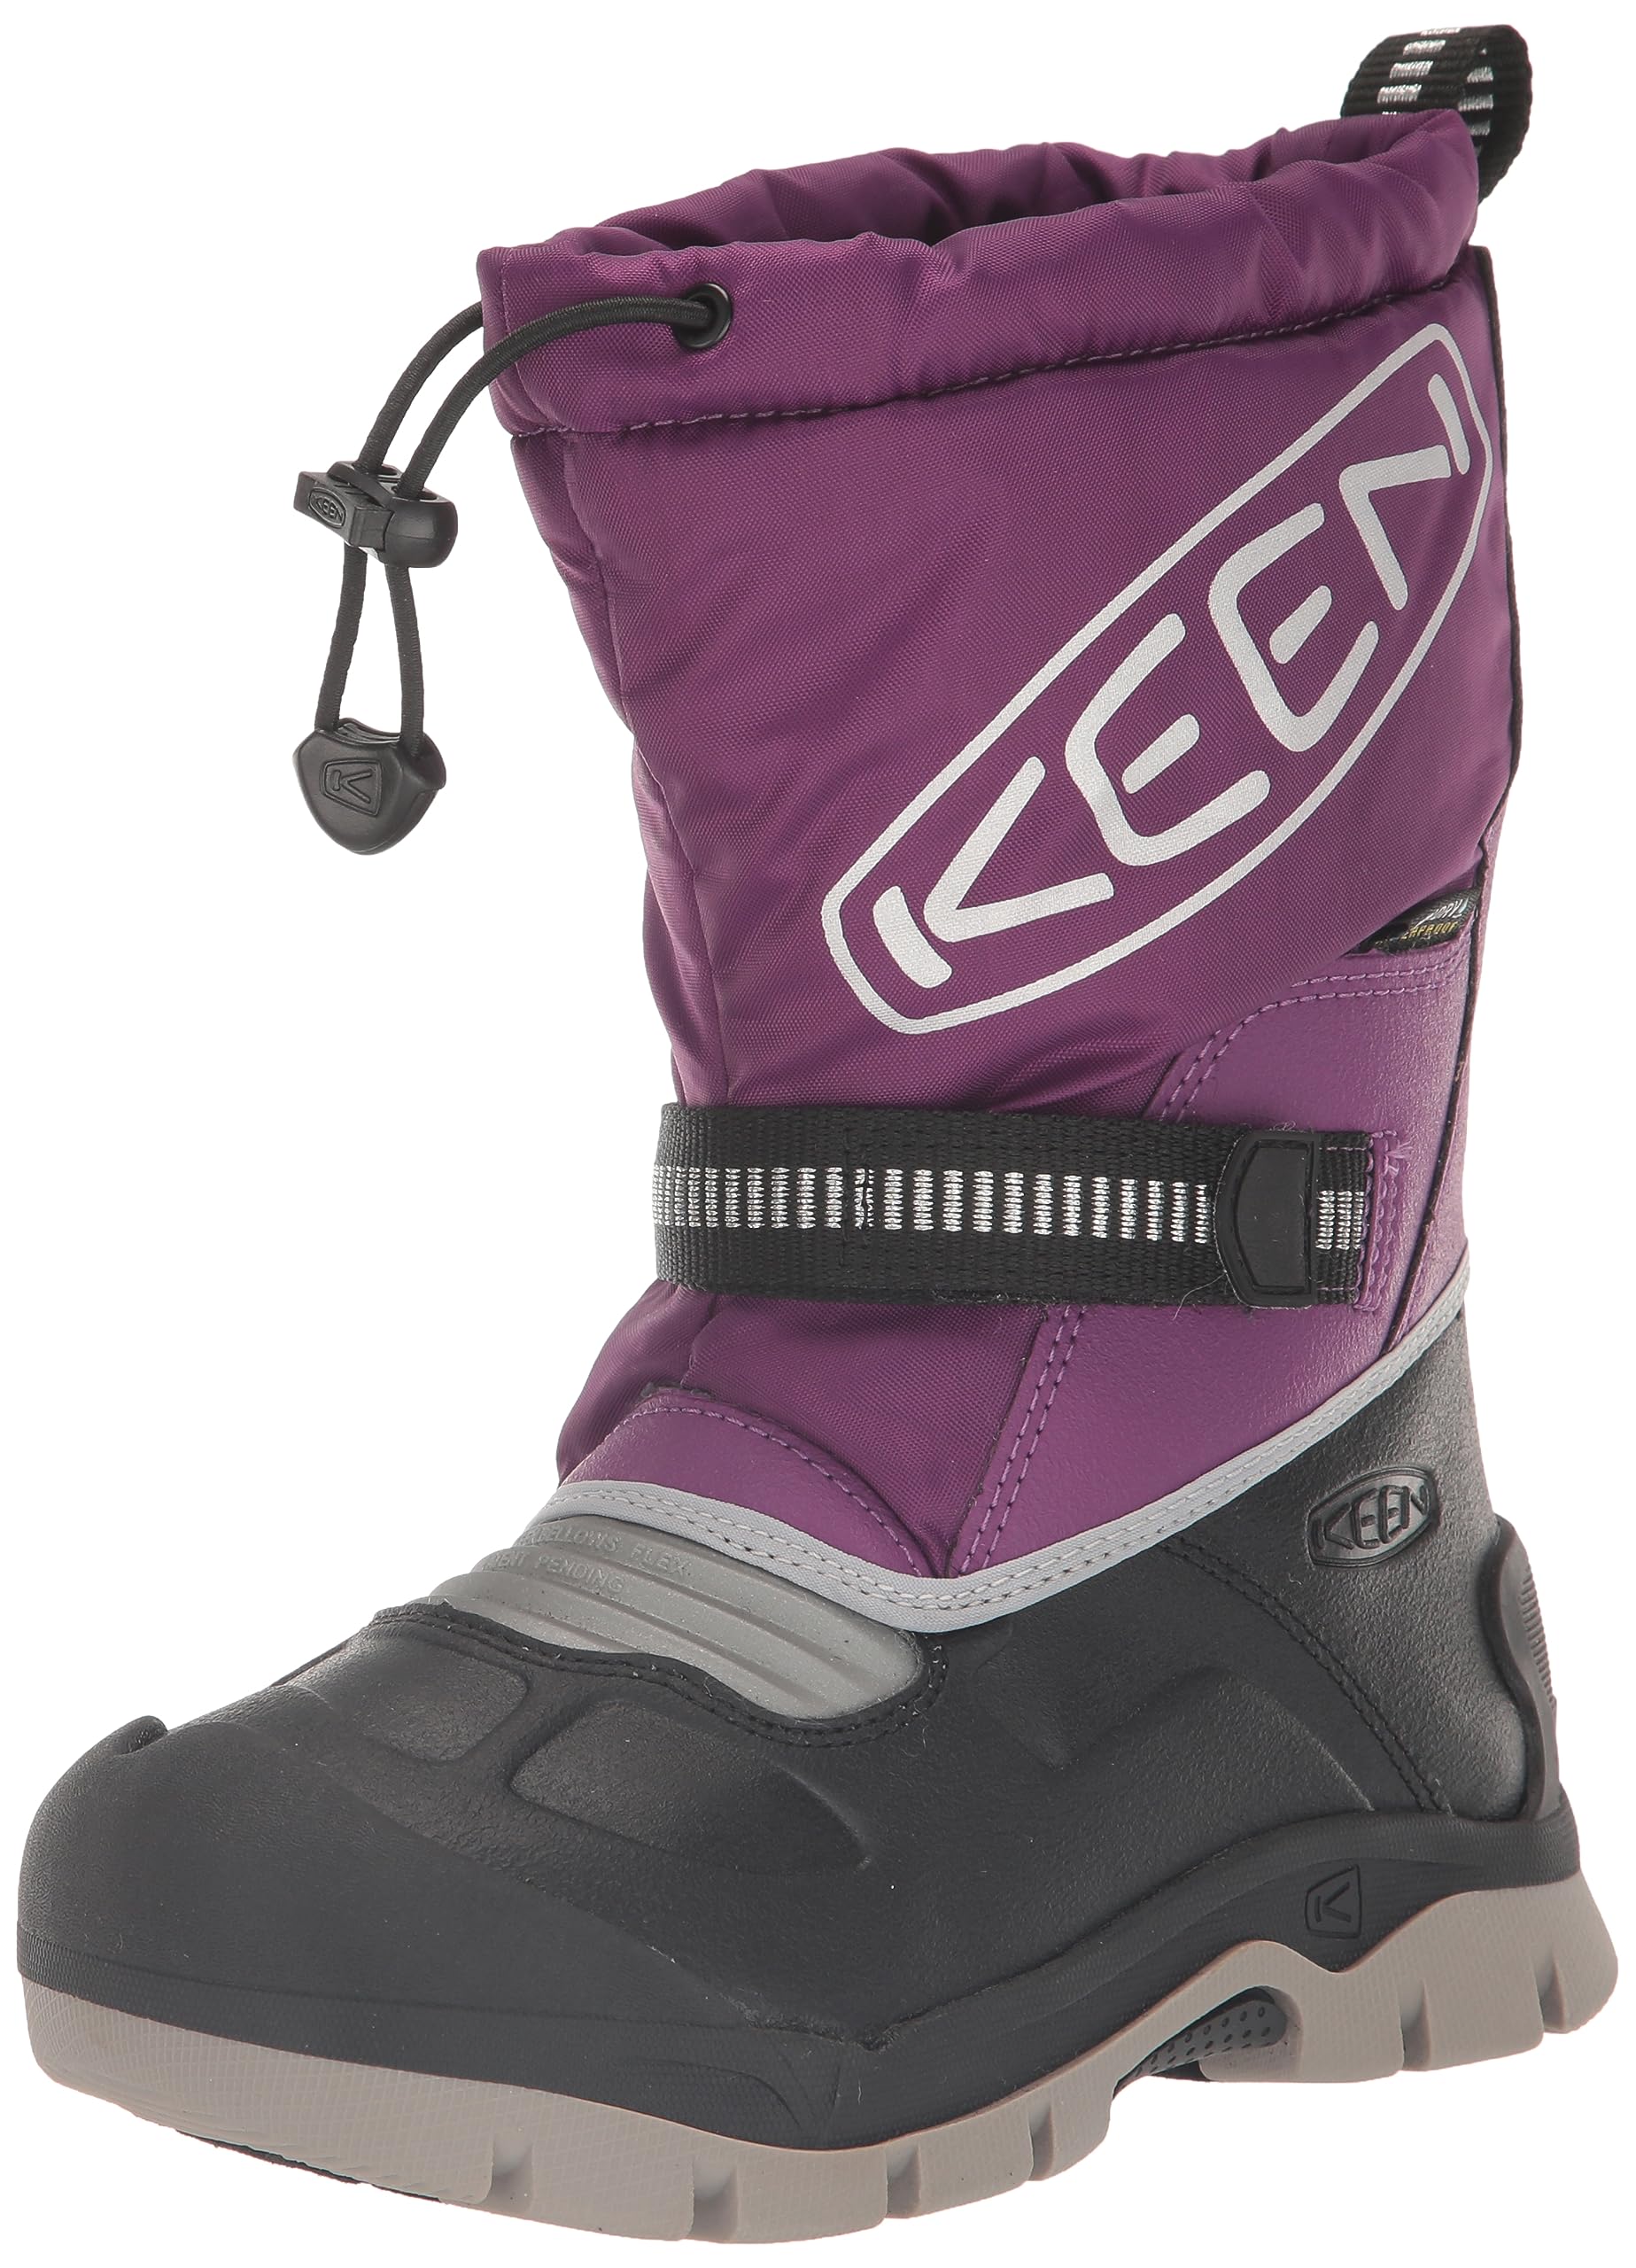 KEEN Unisex-Child Snow Troll Insulated Waterproof Pull on Winter Boots